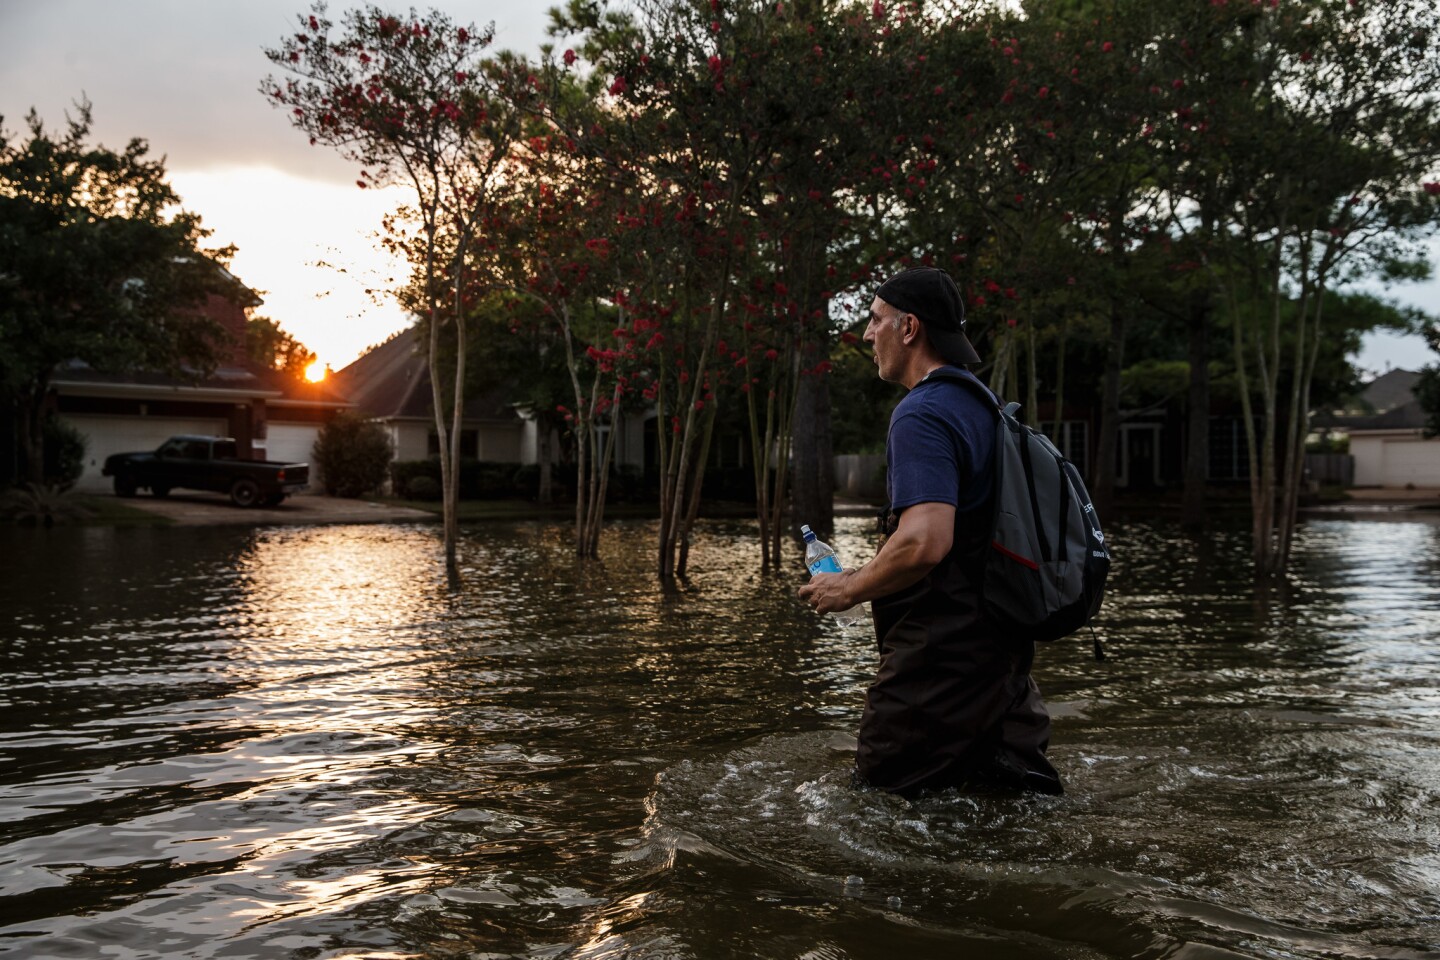 Samir Novruzov wades through water to get to a vehicle after spending the day clearing out his flooded home in Katy, Texas.